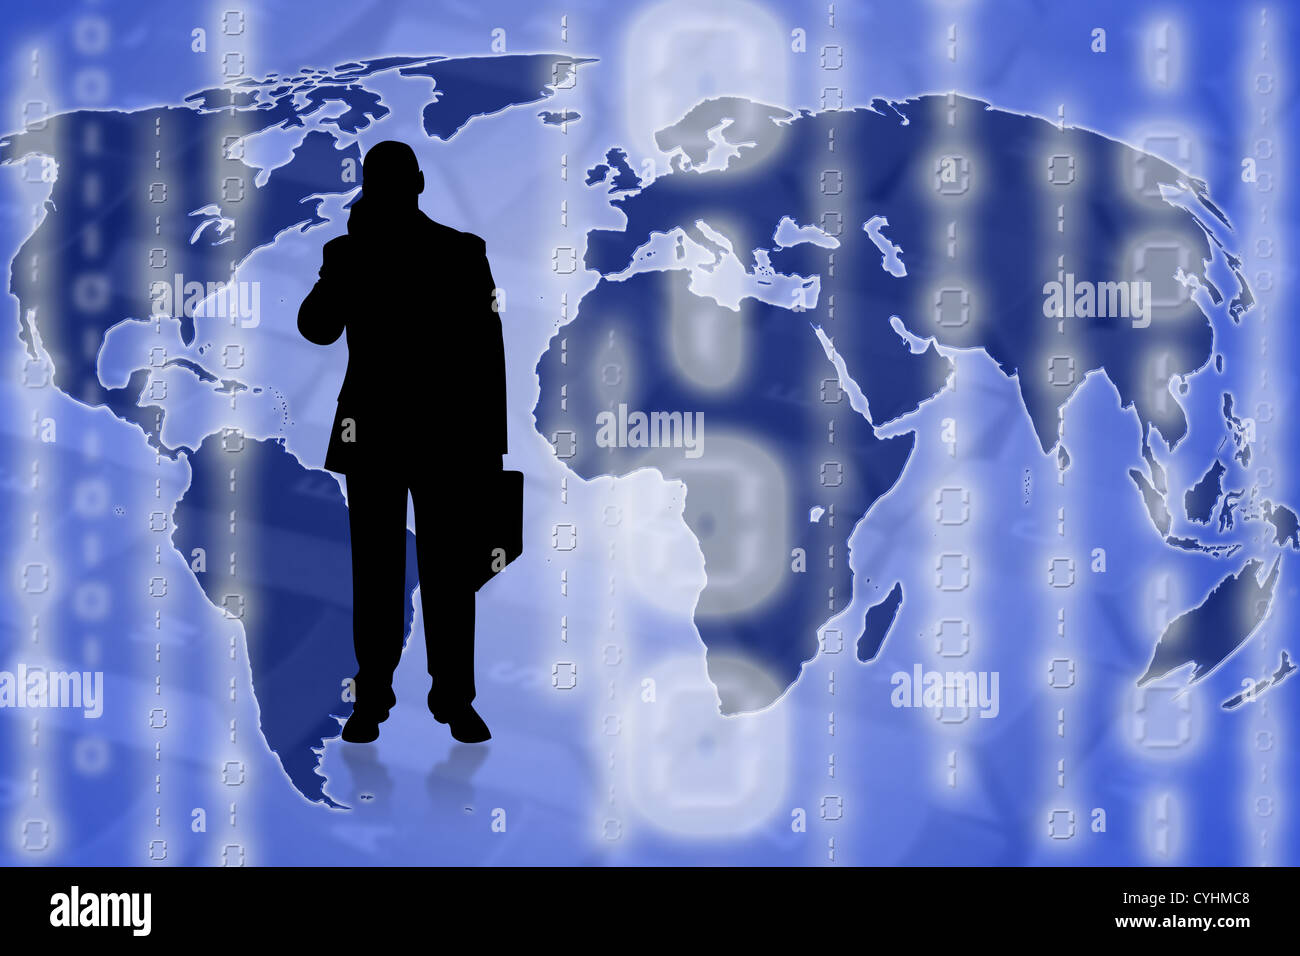 Illustration of a businessman on top of a world map Stock Photo